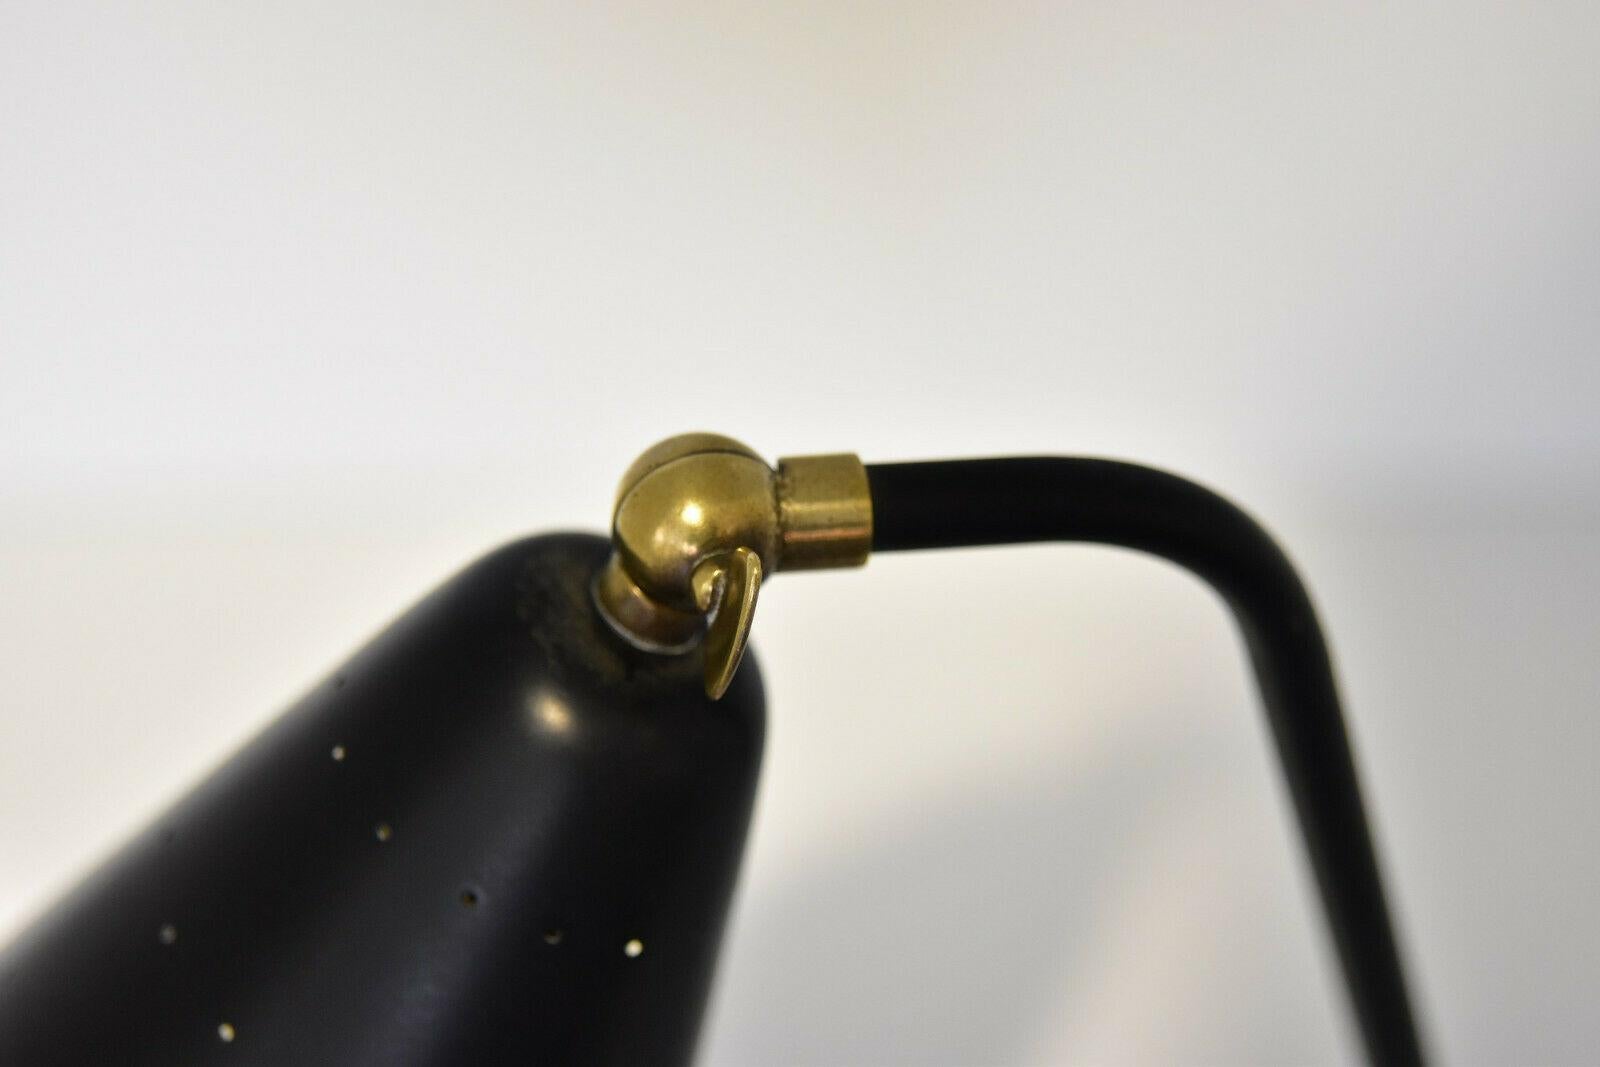 Nice vintage 1950s Svend Aage Holm Sørensen table / wall lamp. Original black colored shade. Shade adjustable and with the brass ring at the base also to use as wall lamp. The brass items are polished. Electric is redone with E26/27 Edison screw